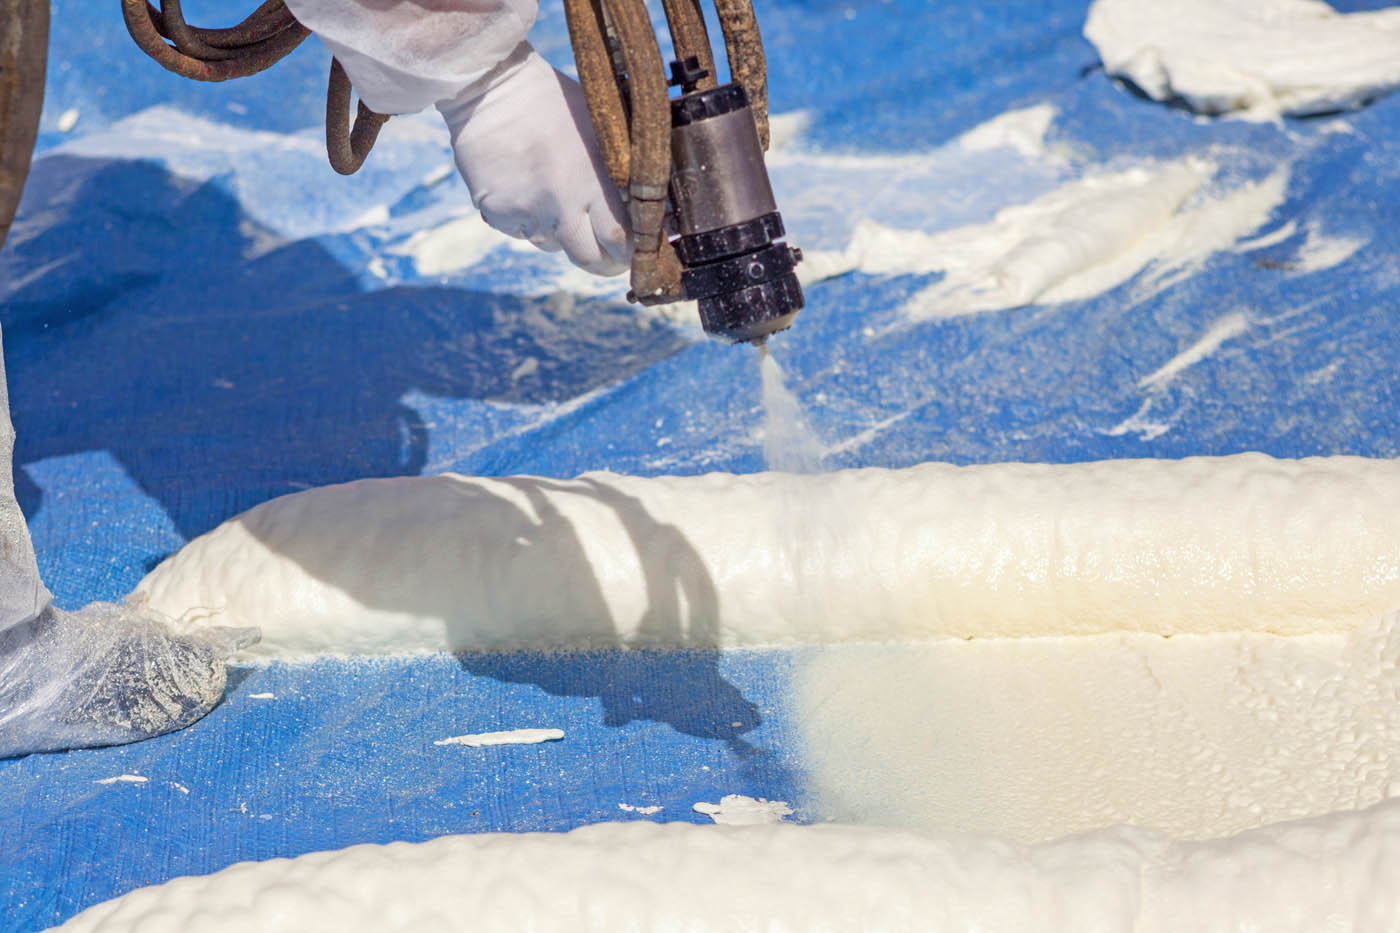 Spray foam being demonstrated on a blue mat, contact iFoam one of the top spray insulation companies.